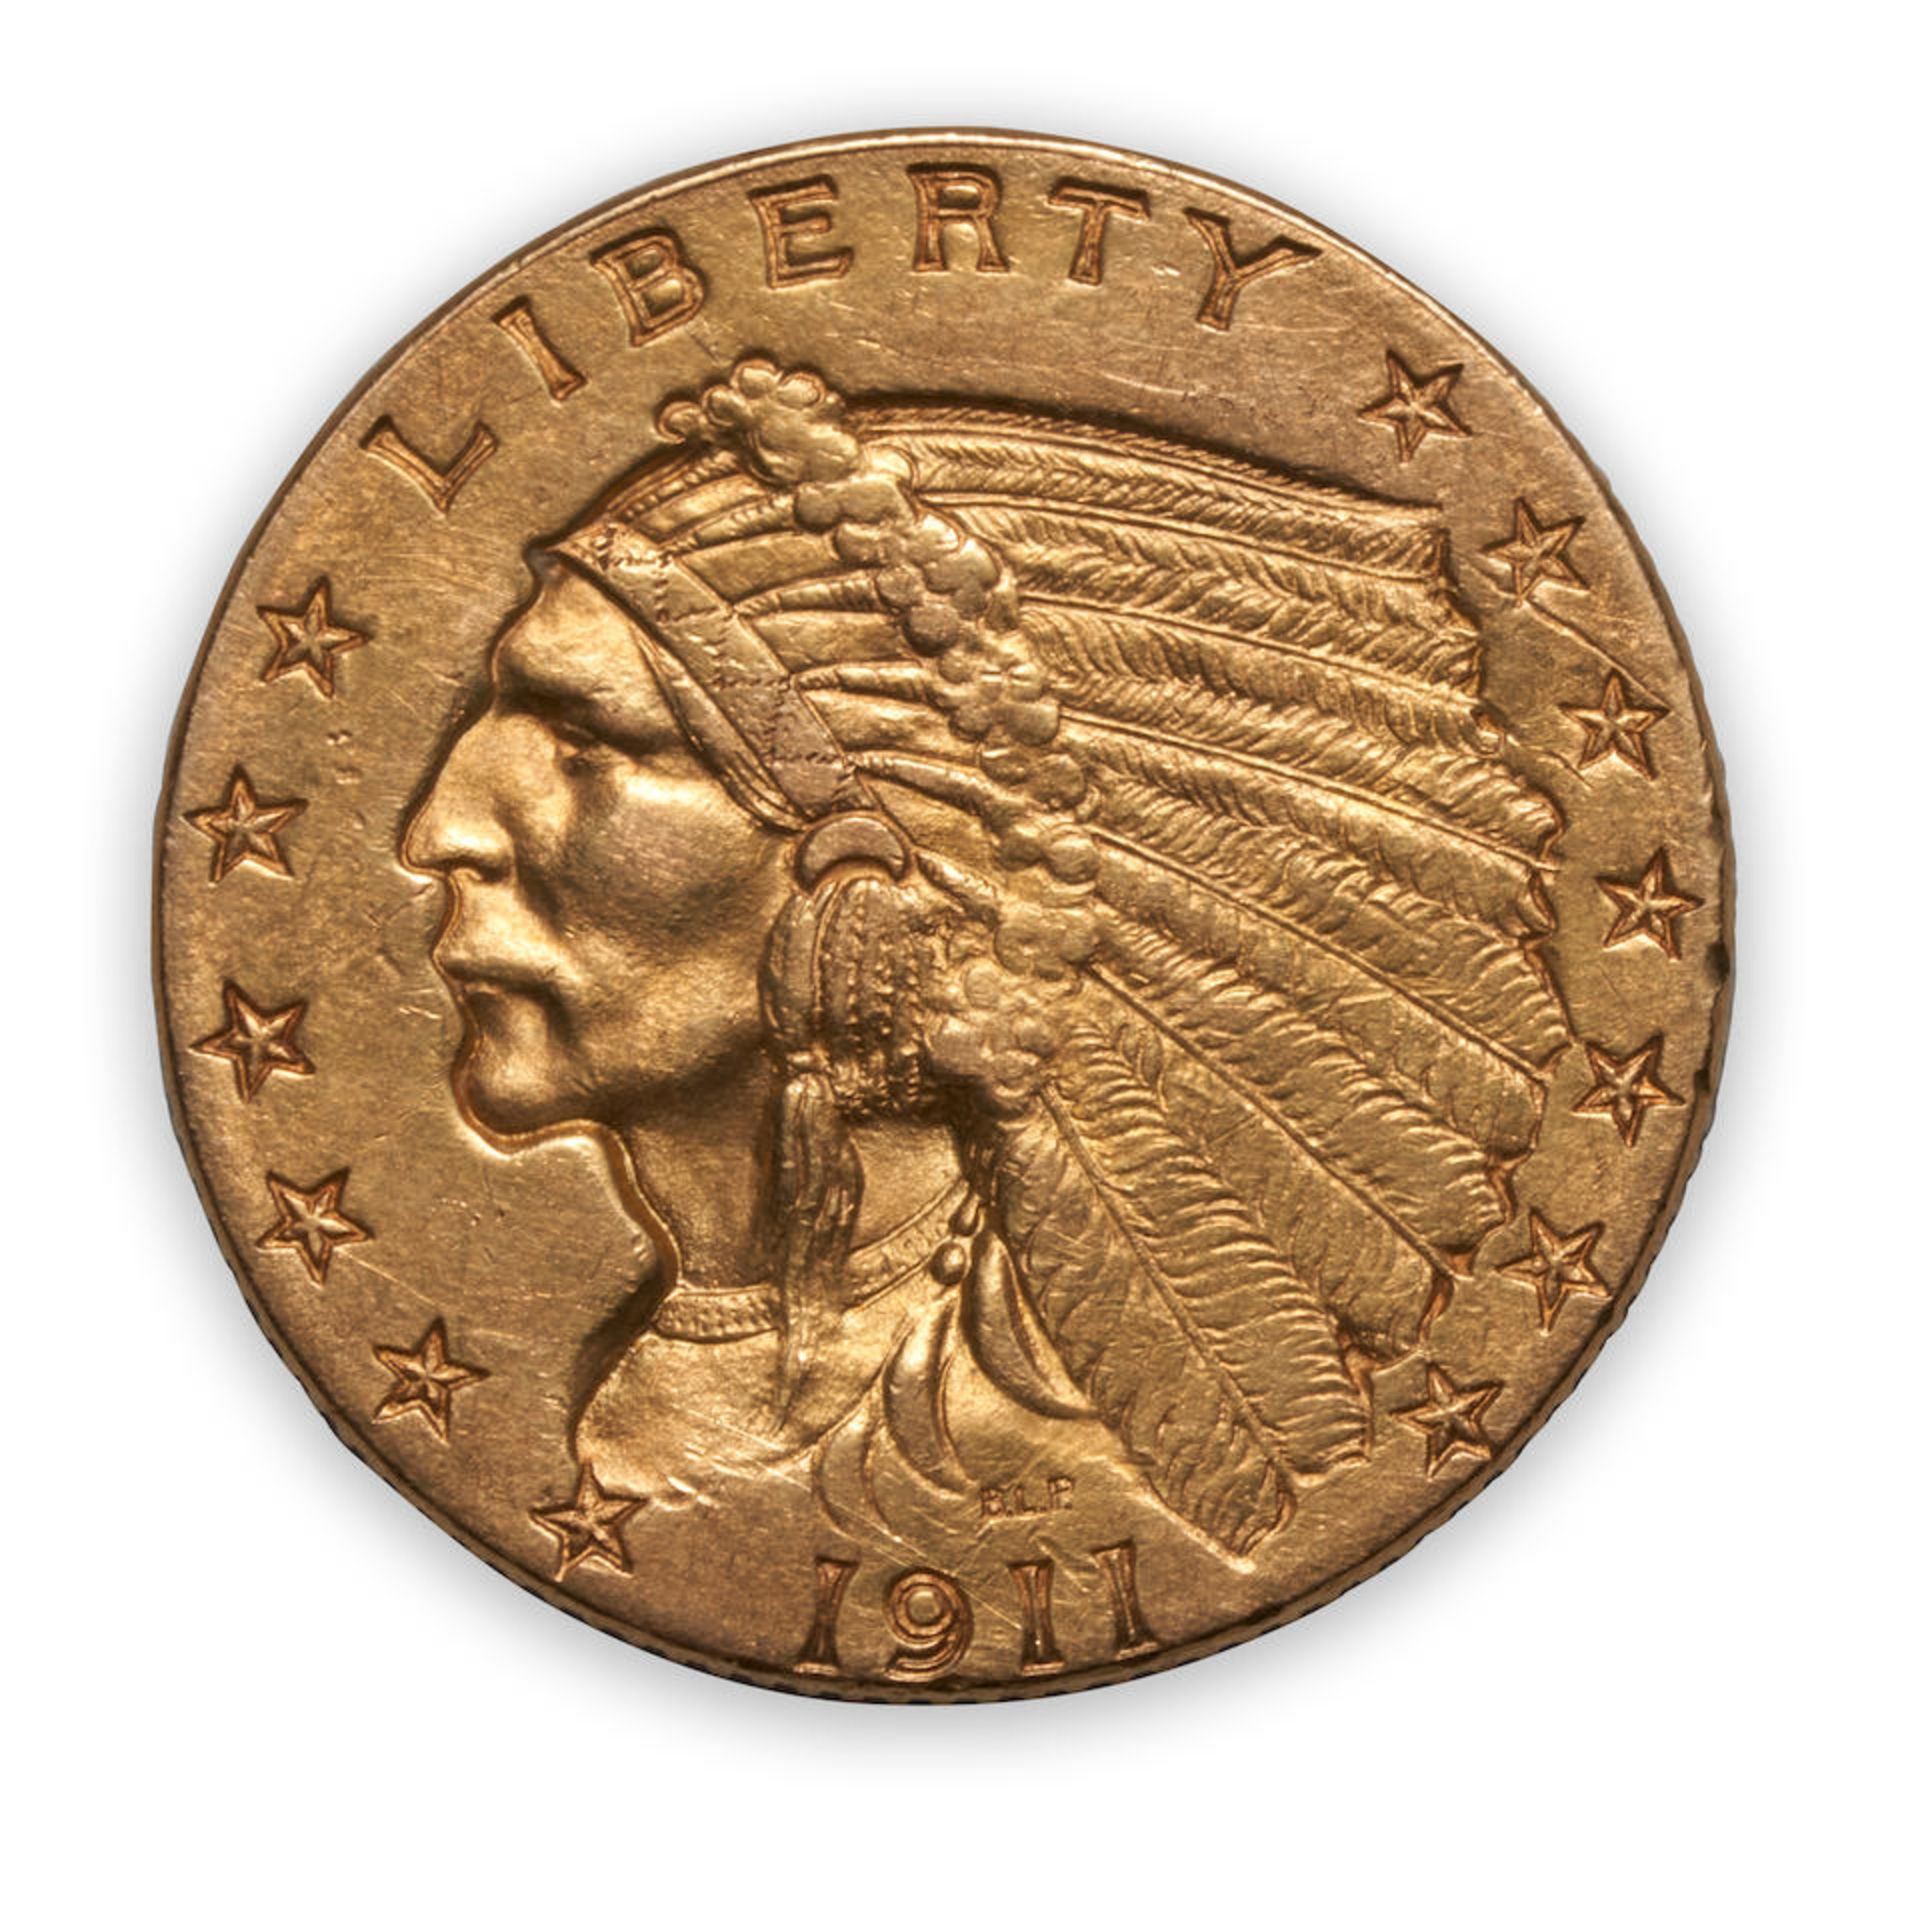 United States Four Indian Head $2.50 Quarter Eagle Gold Coins. - Image 9 of 9